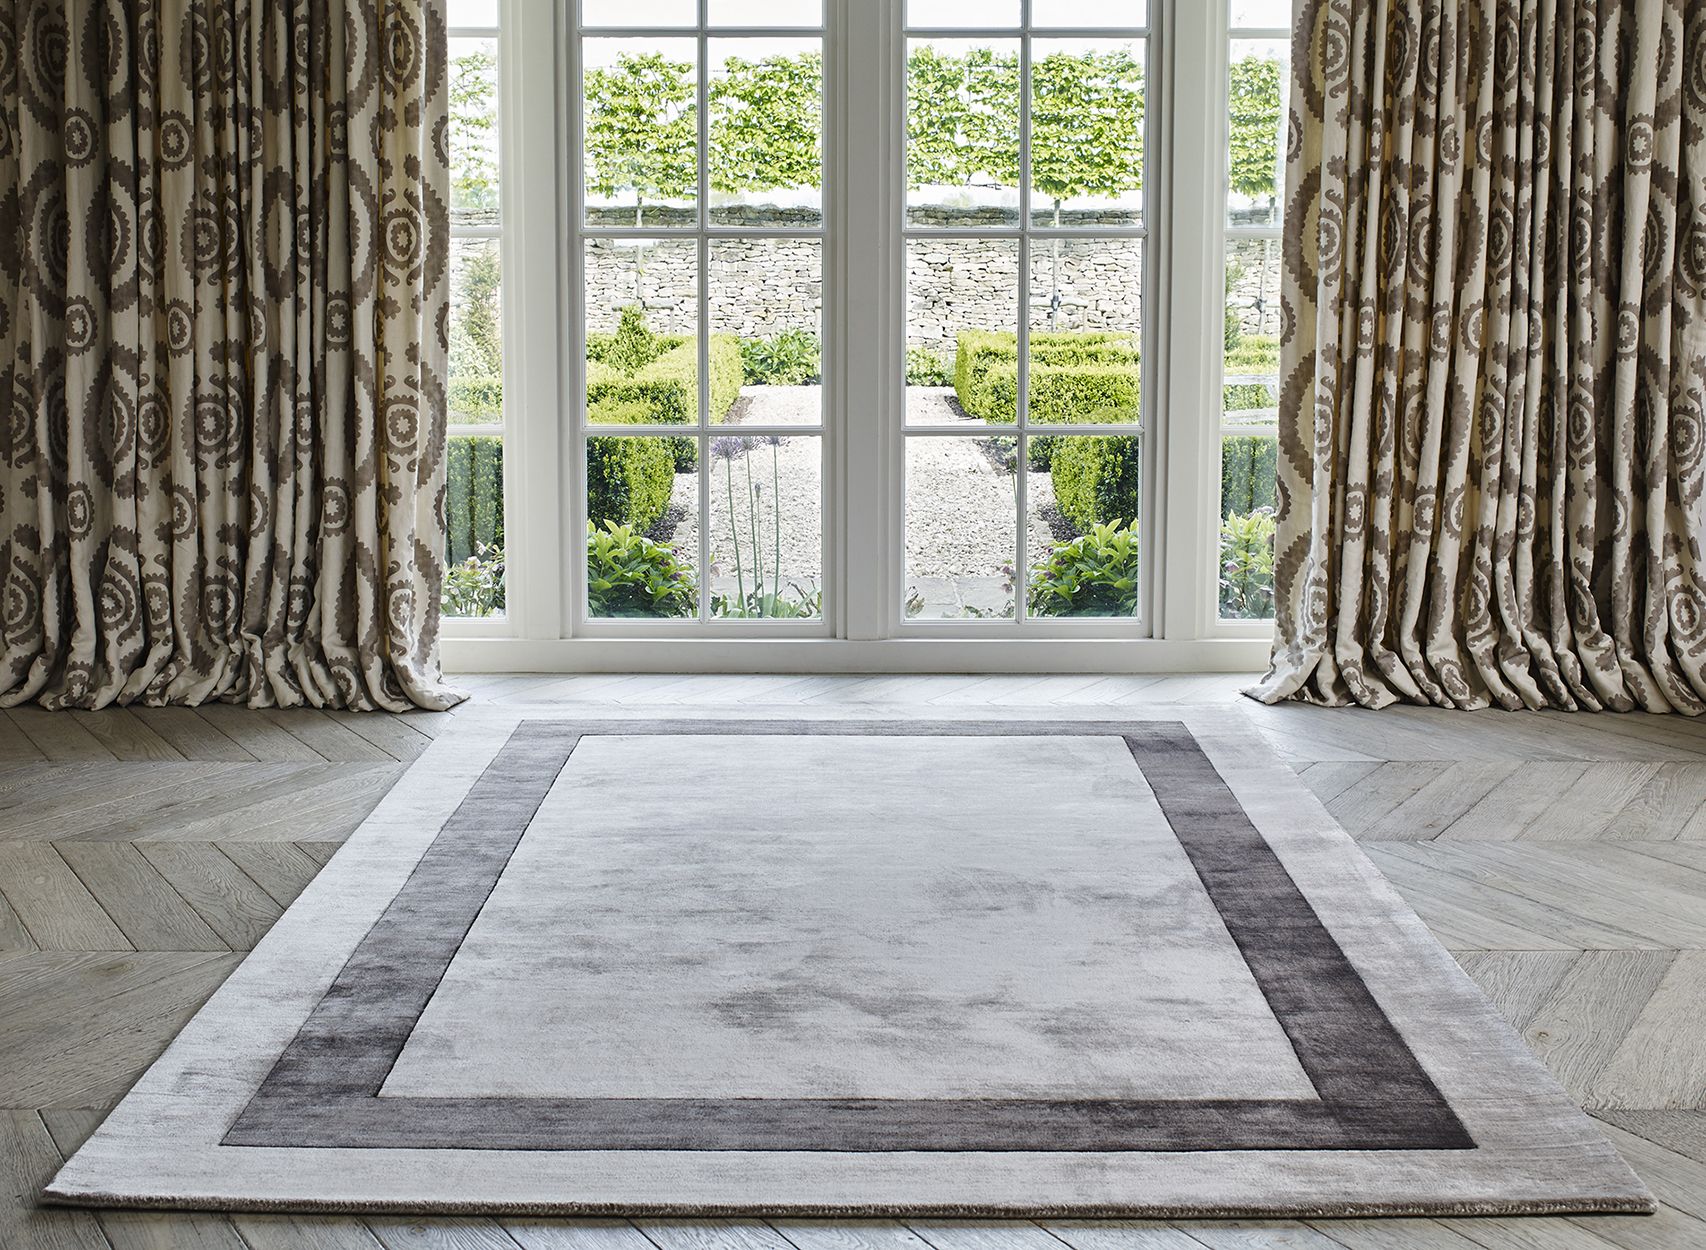 Simla Bordered Starlight & Graphite Rug – Luxury Rugs | London | Cheshire Intended For Starlight Rugs (View 6 of 15)